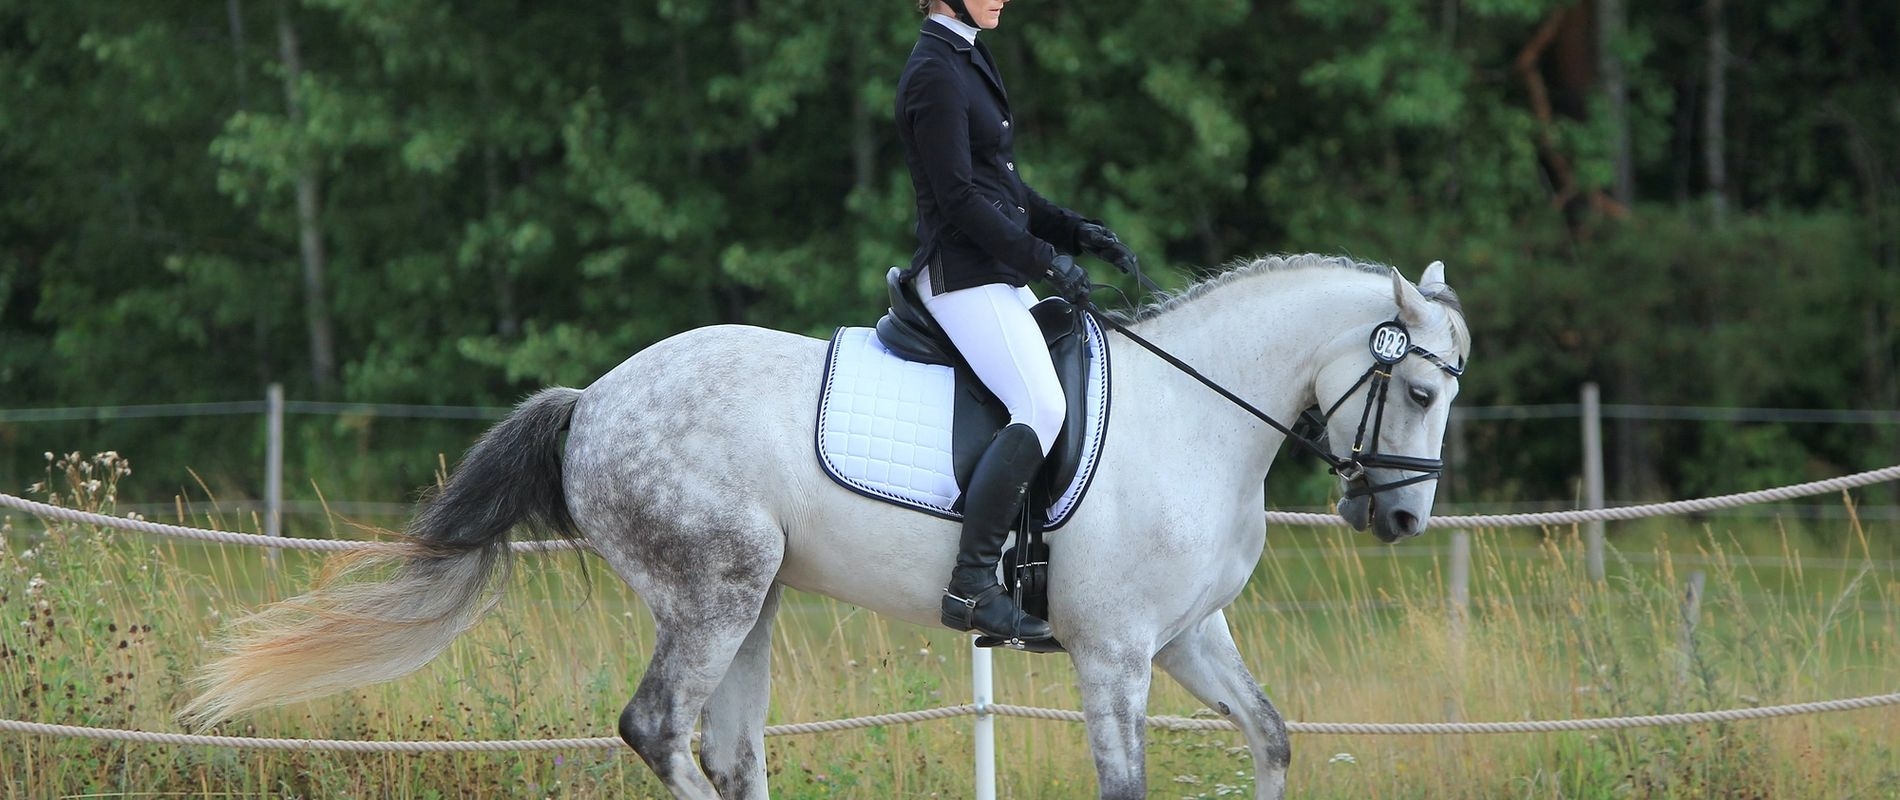 Dressage pony cantering